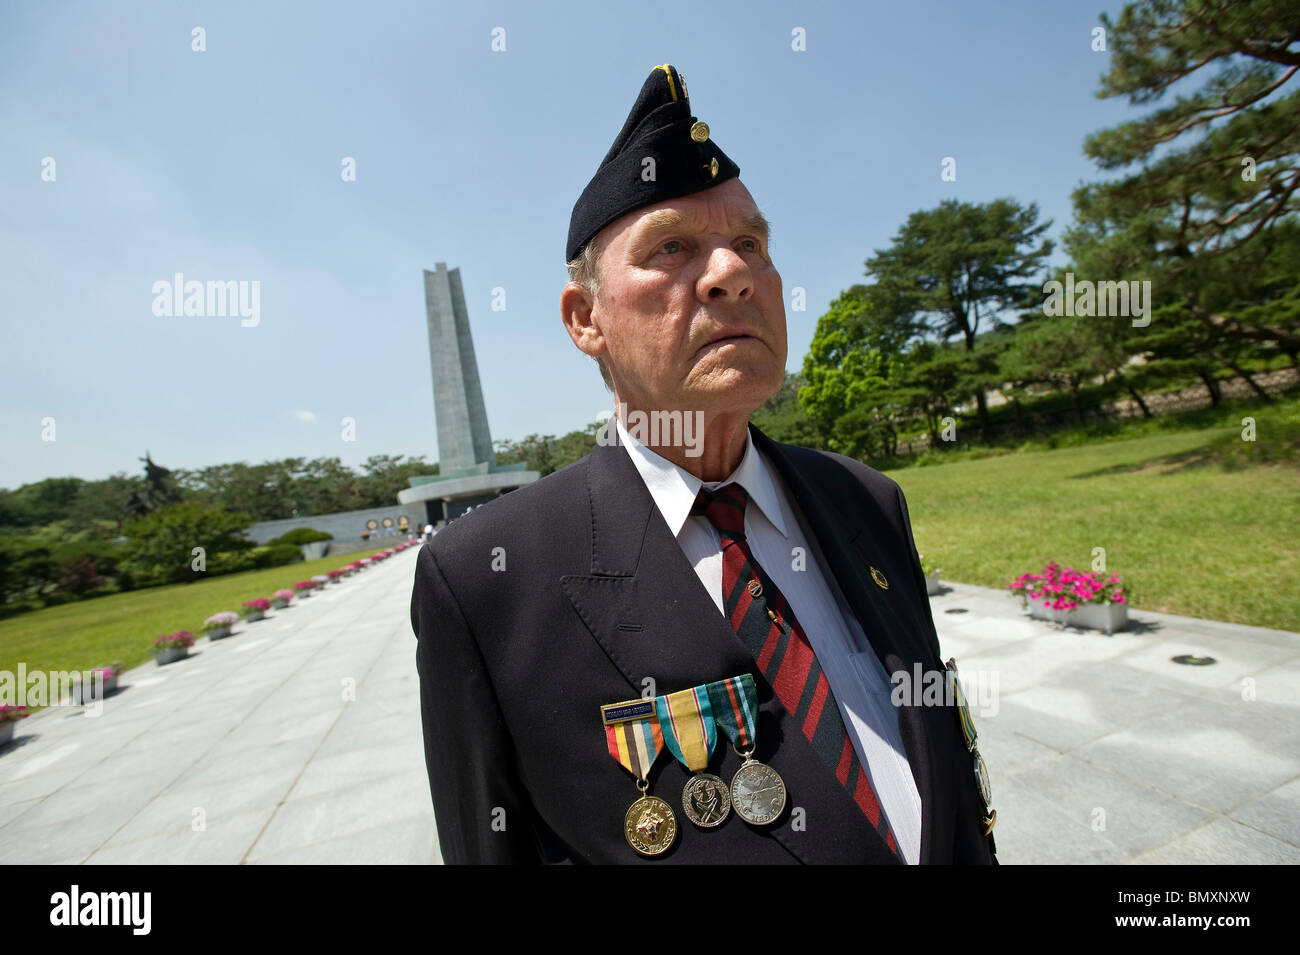 Korean War veteran Ernest Moscrop from the UK in Seoul for Korea War anniversay events Stock Photo